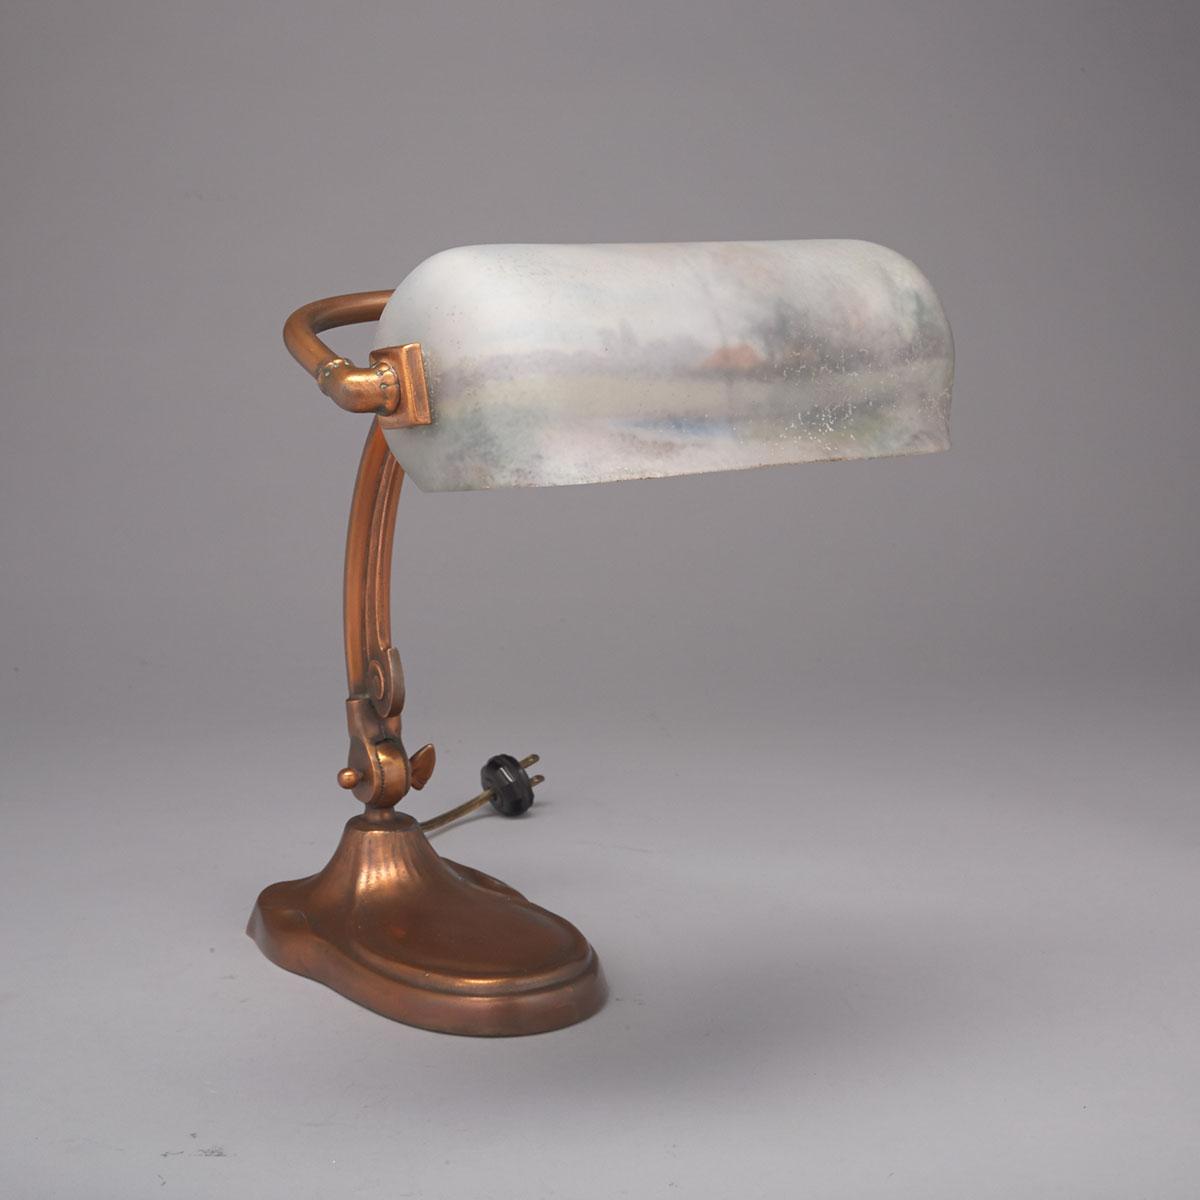 Handel Reverse Painted Glass and Coppered Metal Piano Lamp, early 20th century